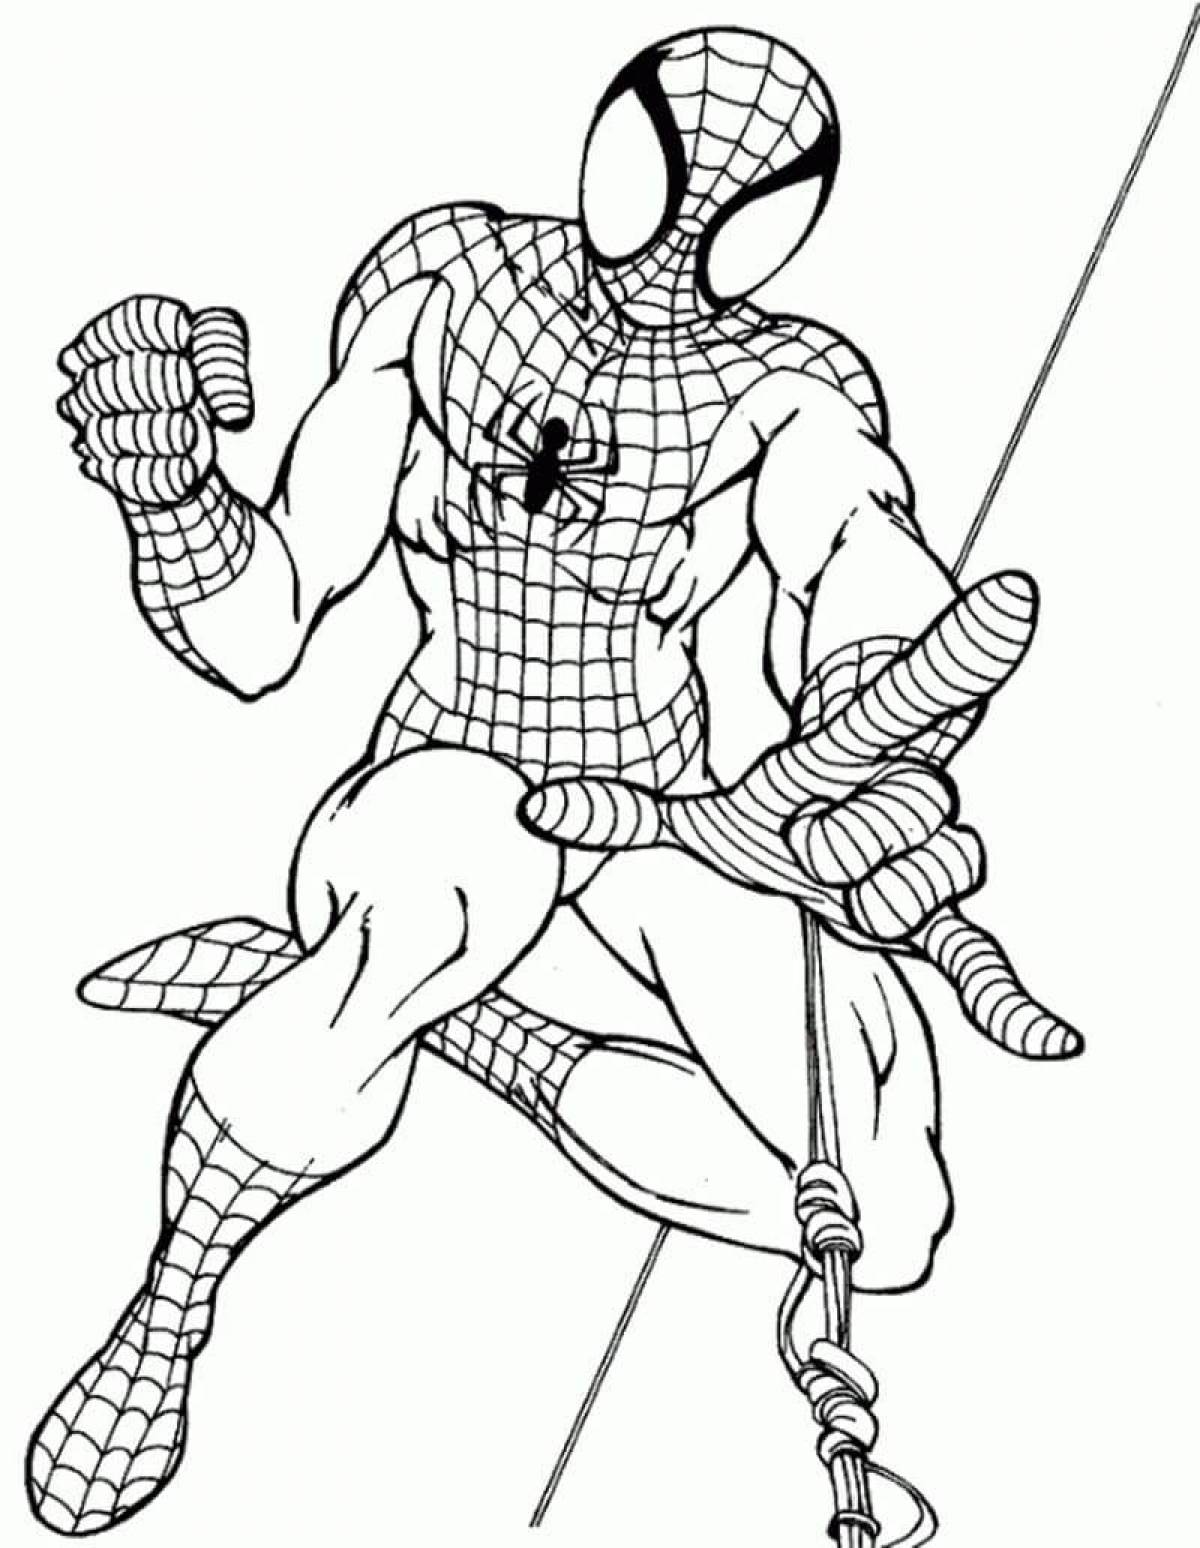 Delicately detailed Spider-Man coloring page